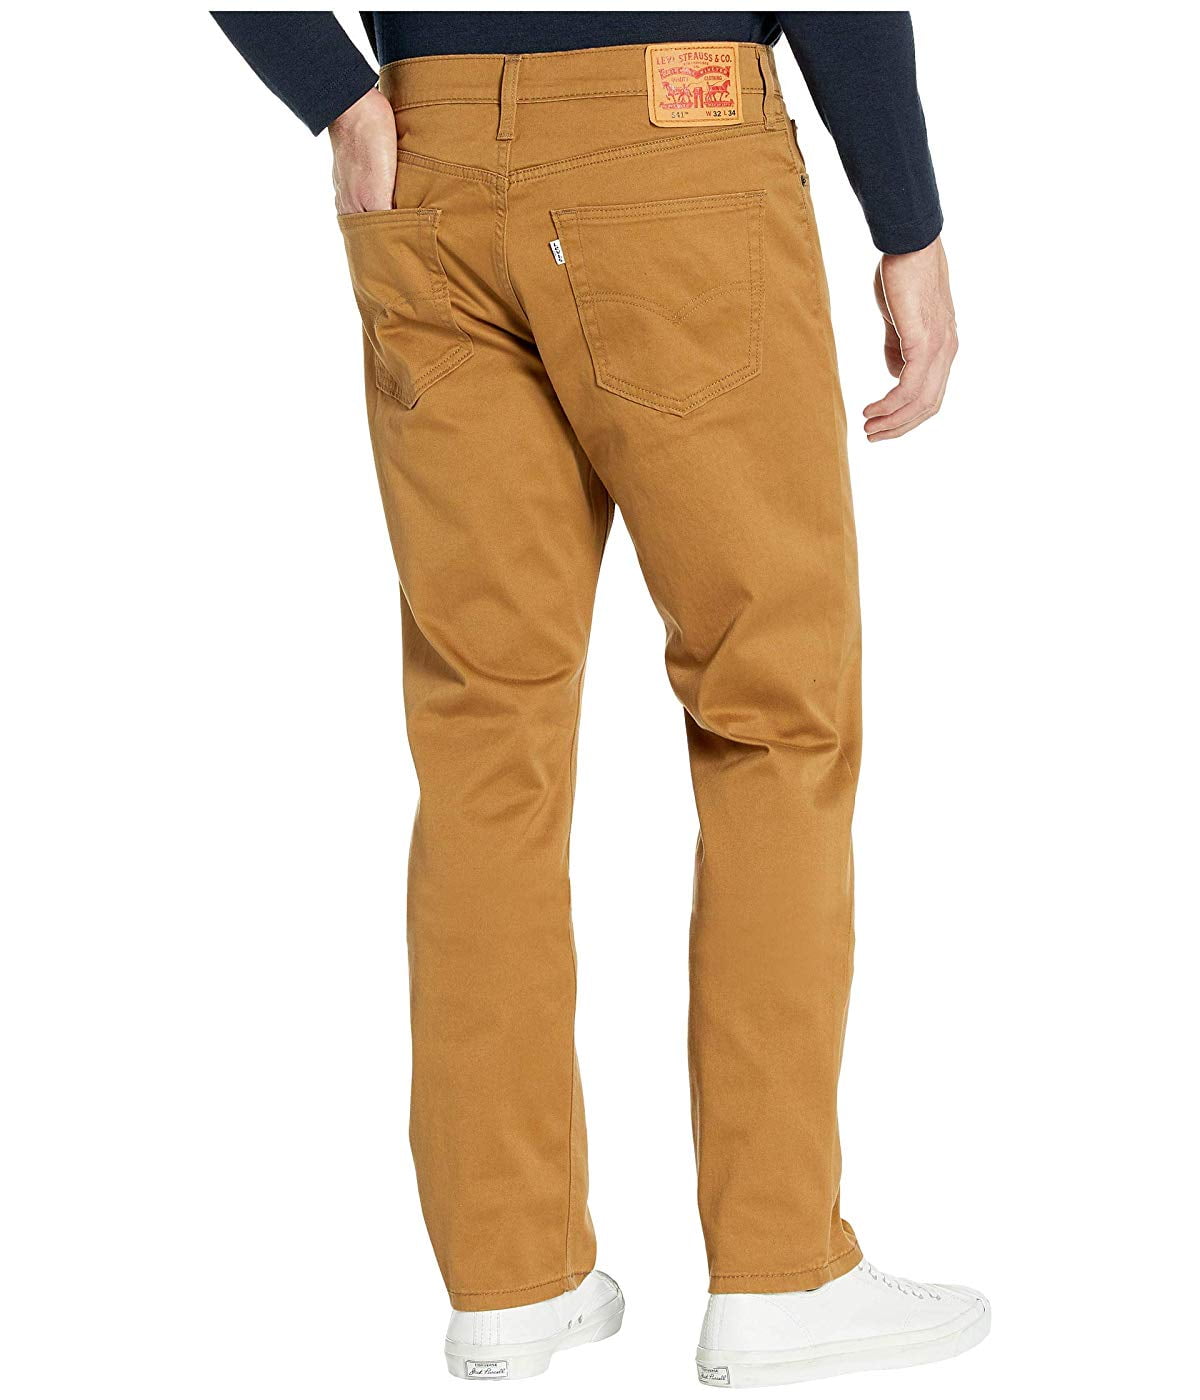 Levi's® 541™ Athletic Taper Fit 5 Pocket Twill Pant - Stretch